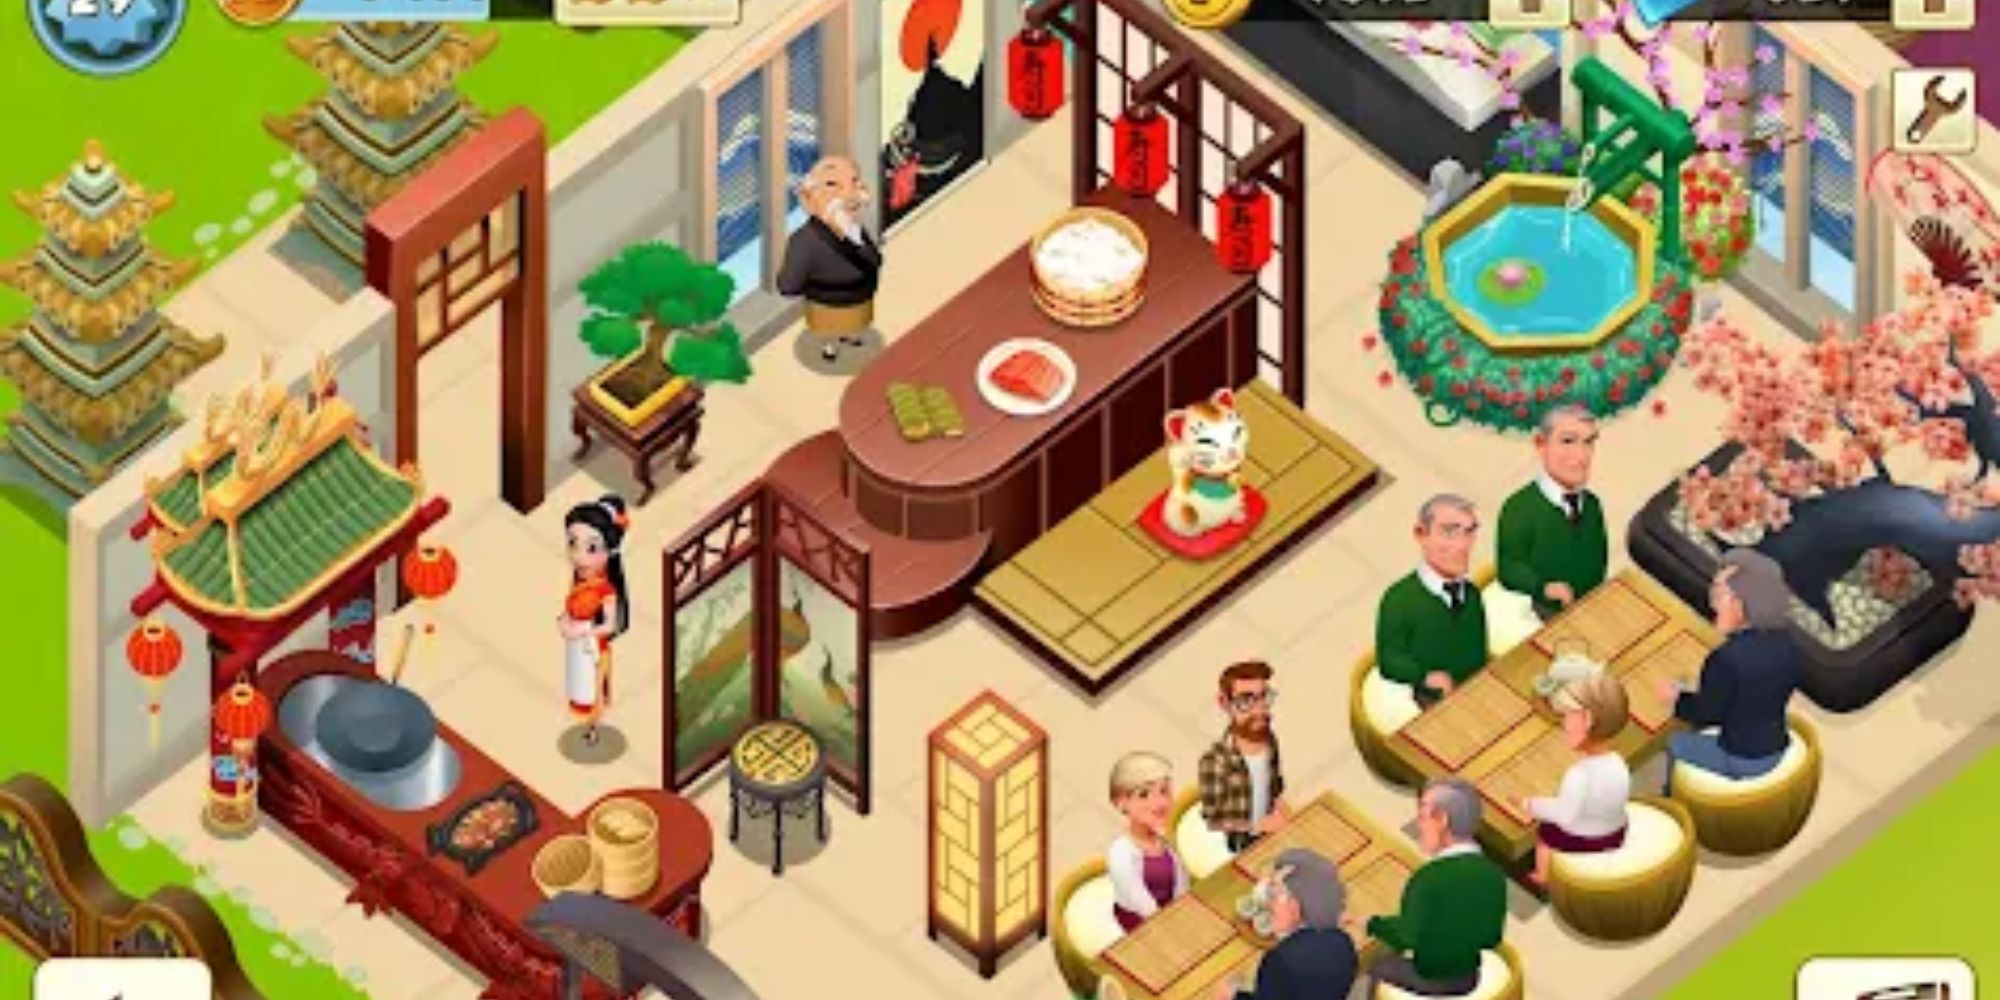 A screenshot featuring gameplay from World Chef.